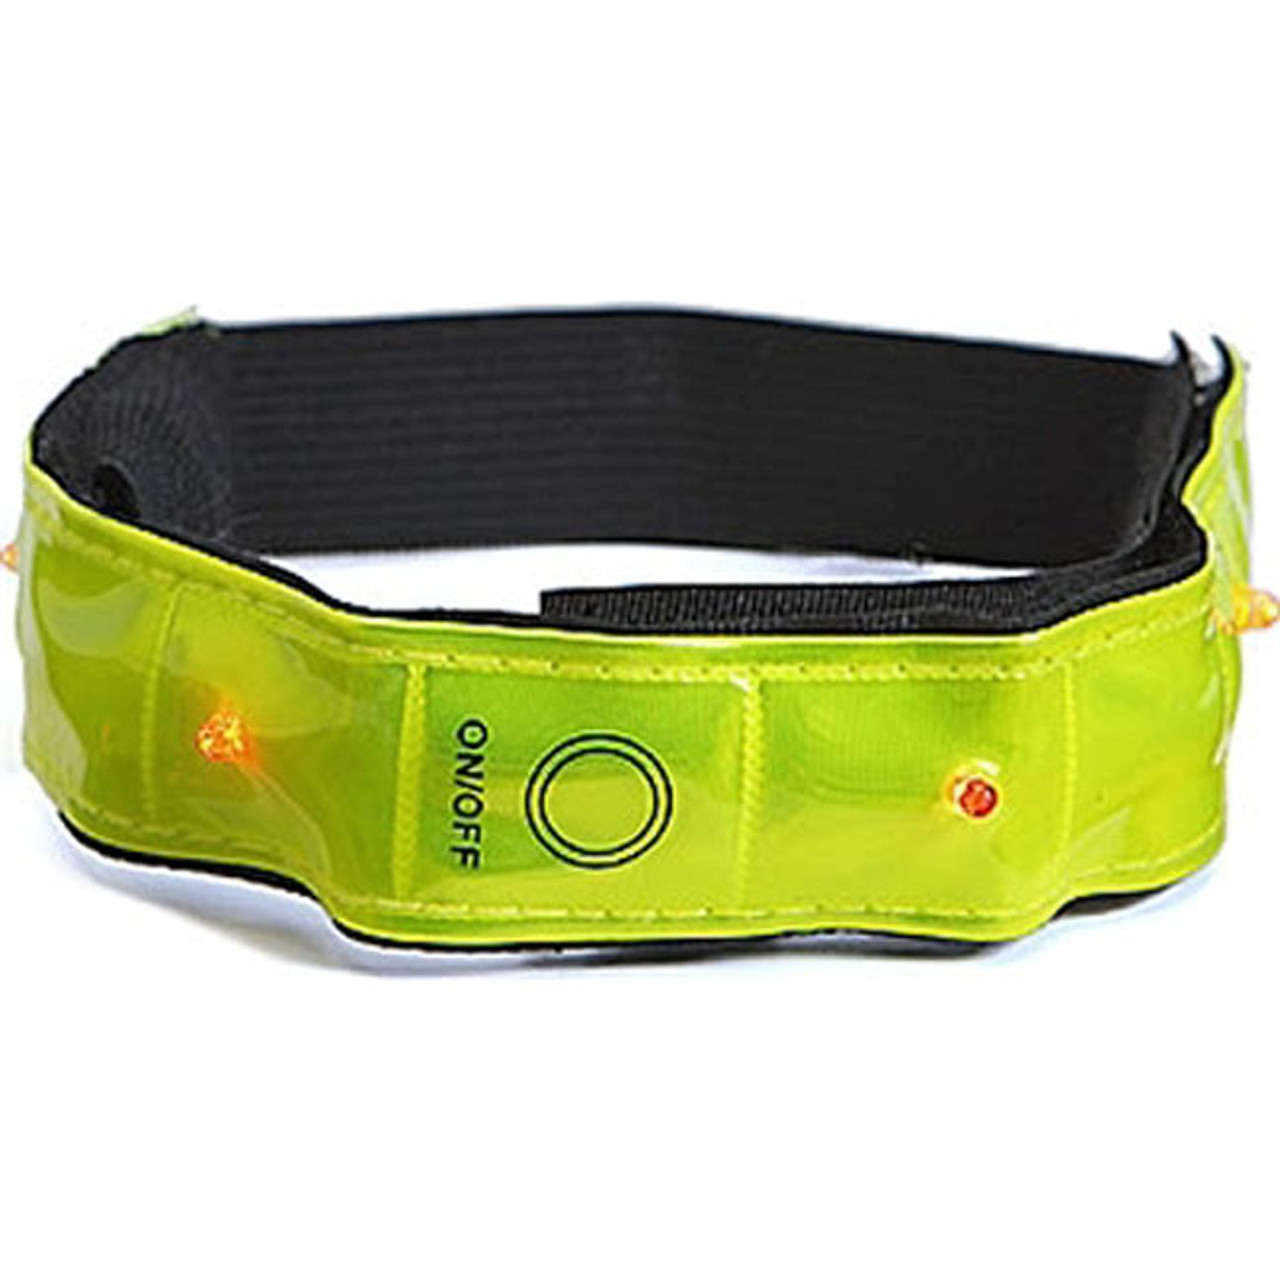 MAXSA Innovations Reflective Safety Band with 4 LED Lights